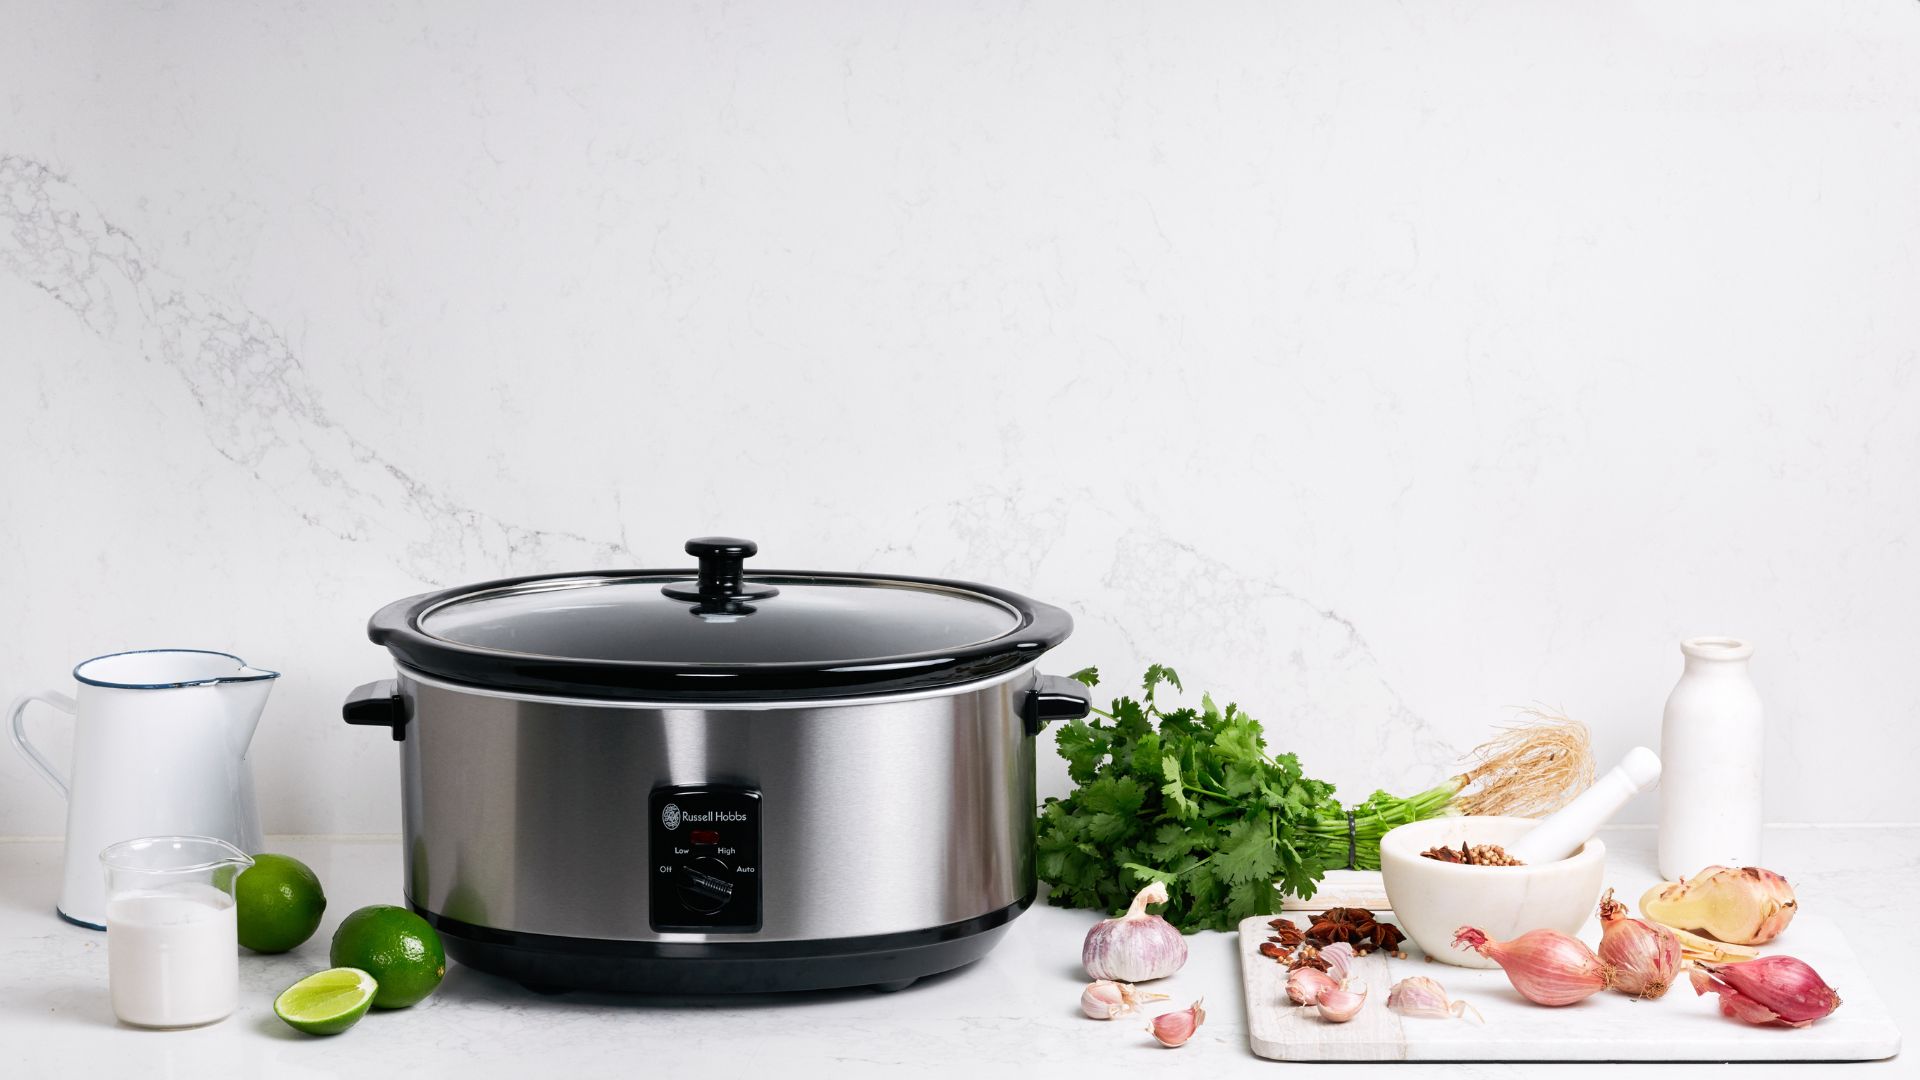 Enjoy the new cooking possibilities with the Russell Hobbs 6 L Slow Cooker RHSC600